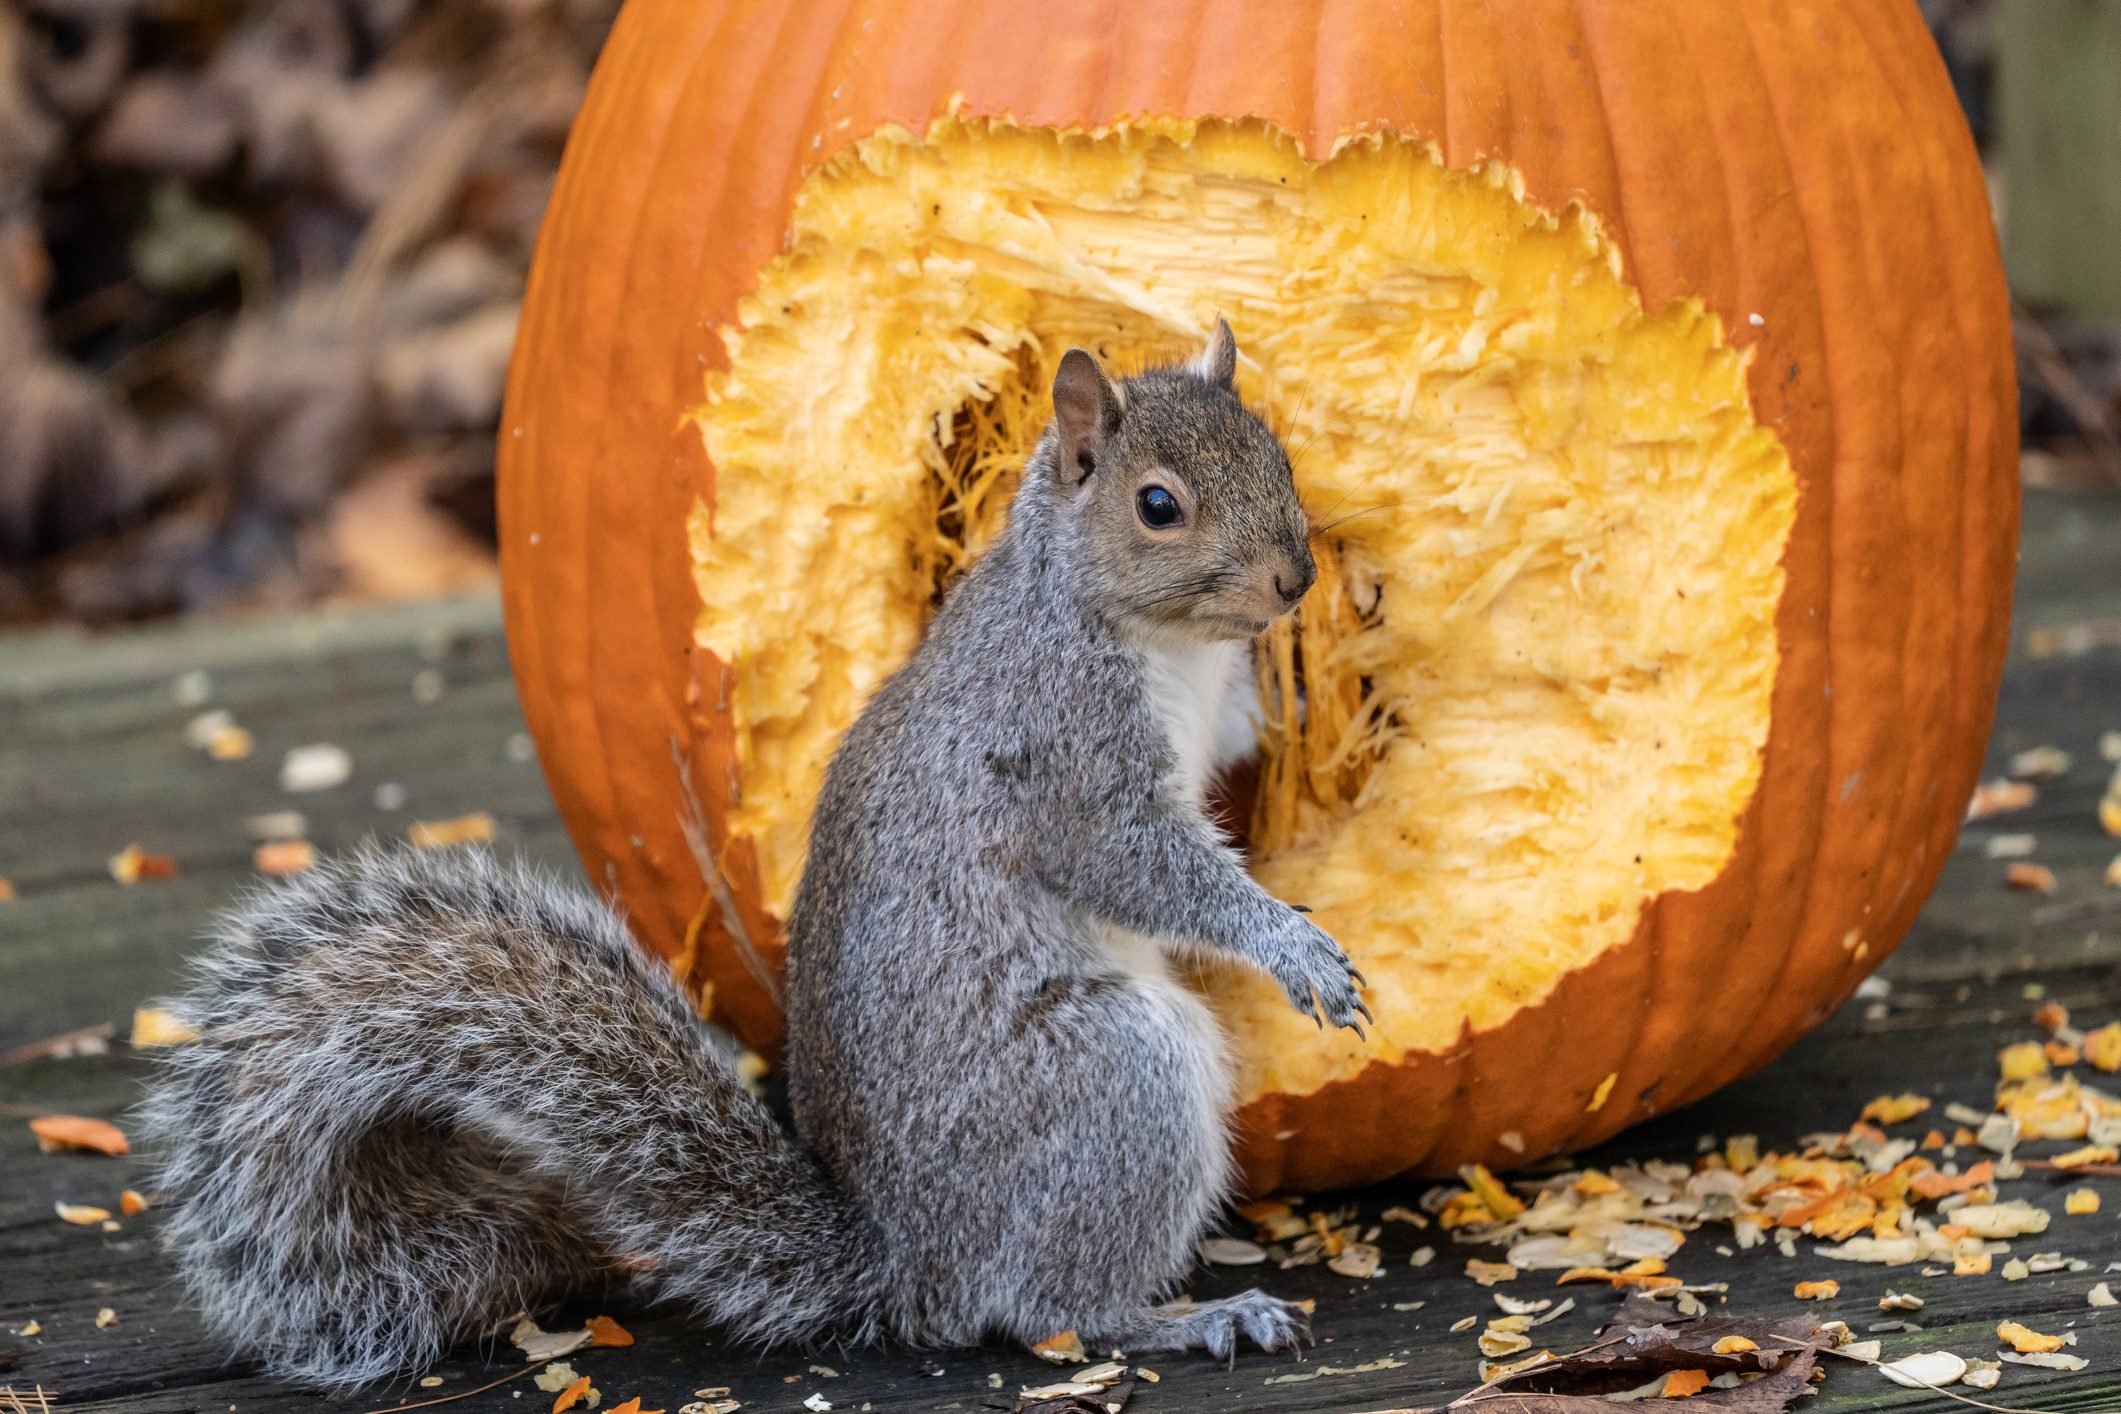 How to Protect Your Carved Pumpkins from Pests